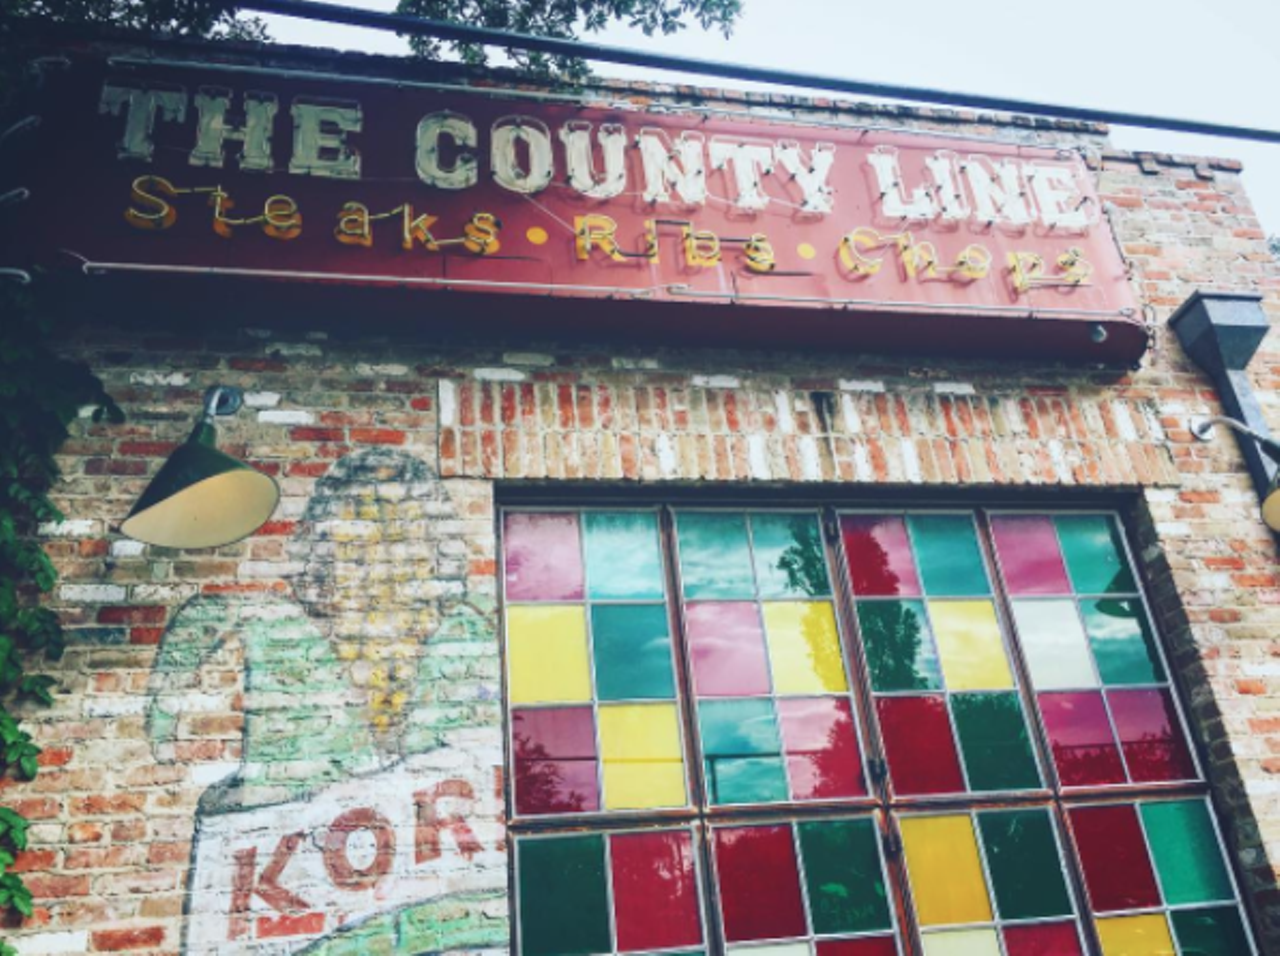 The County Line BBQ
10101 W I- 10, (210) 641-1998, countyline.com
The County Line brings you two nights of music that are completely free. With tunes on Thursday and Friday nights, a live performance is the cherry on top after a delicious plate of BBQ.
Photo via Instagram, brotherspowell